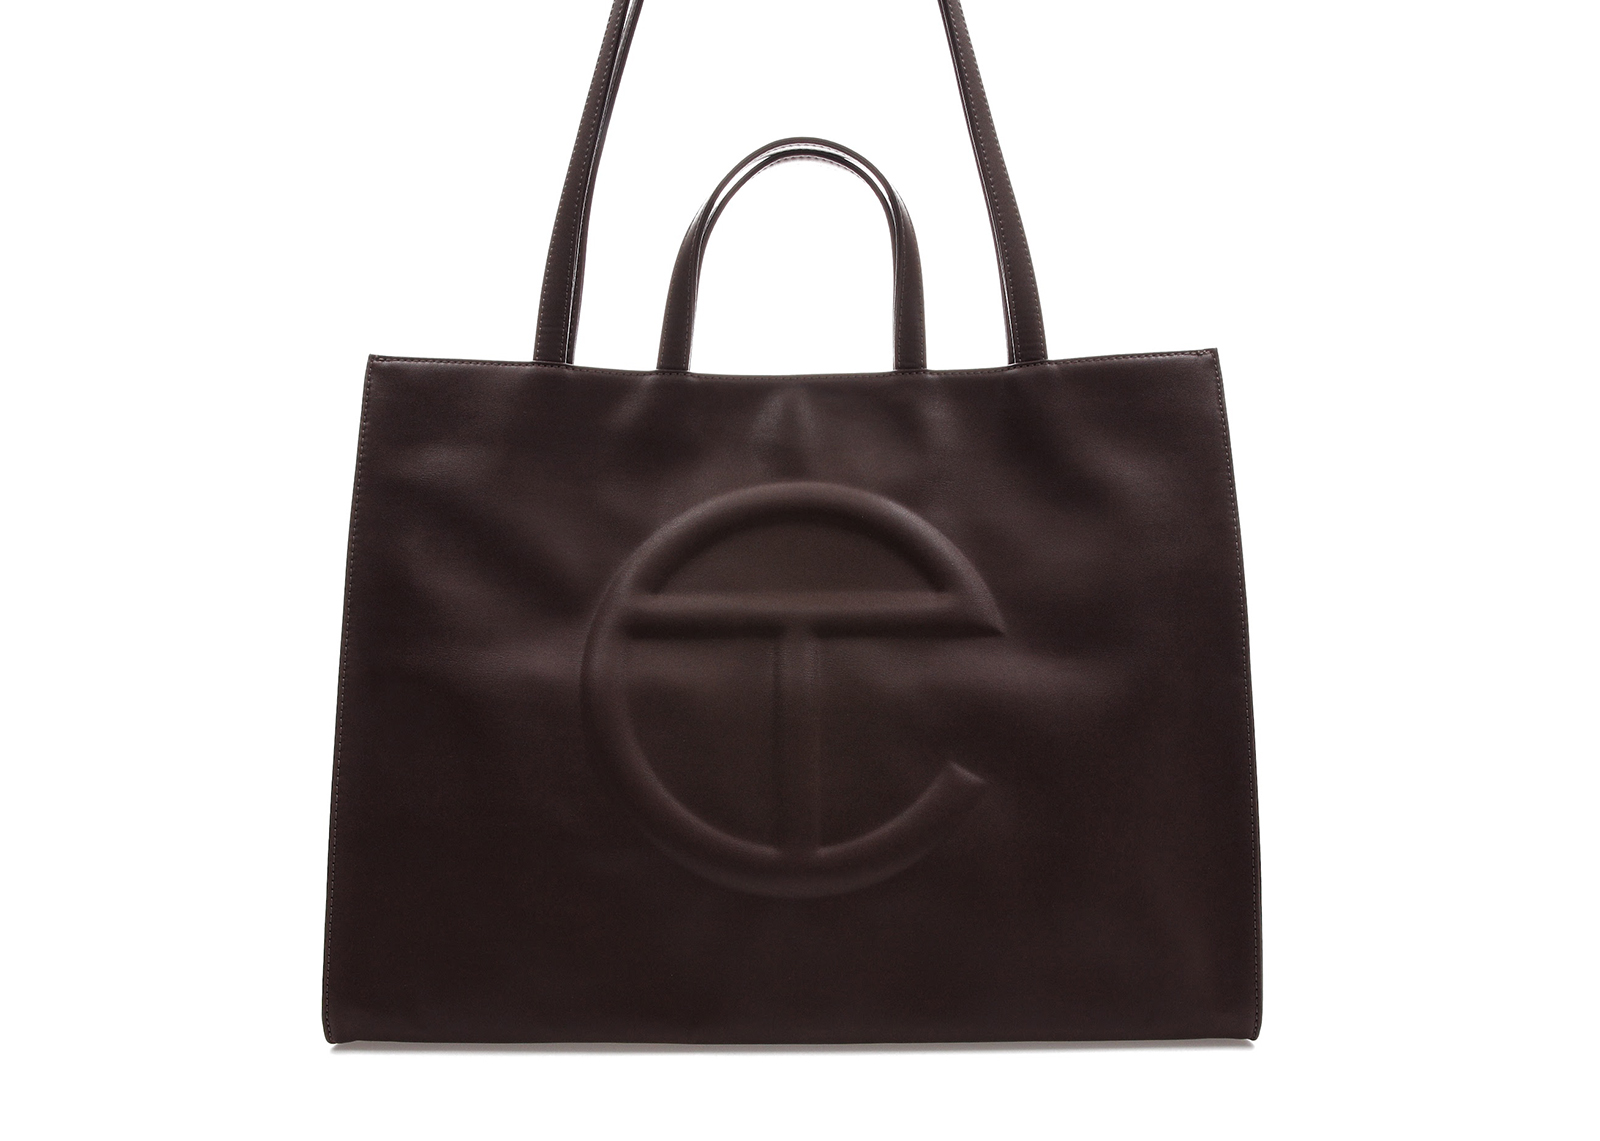 Telfar Shopping Bag Large Chocolate in Vegan Leather with Silver